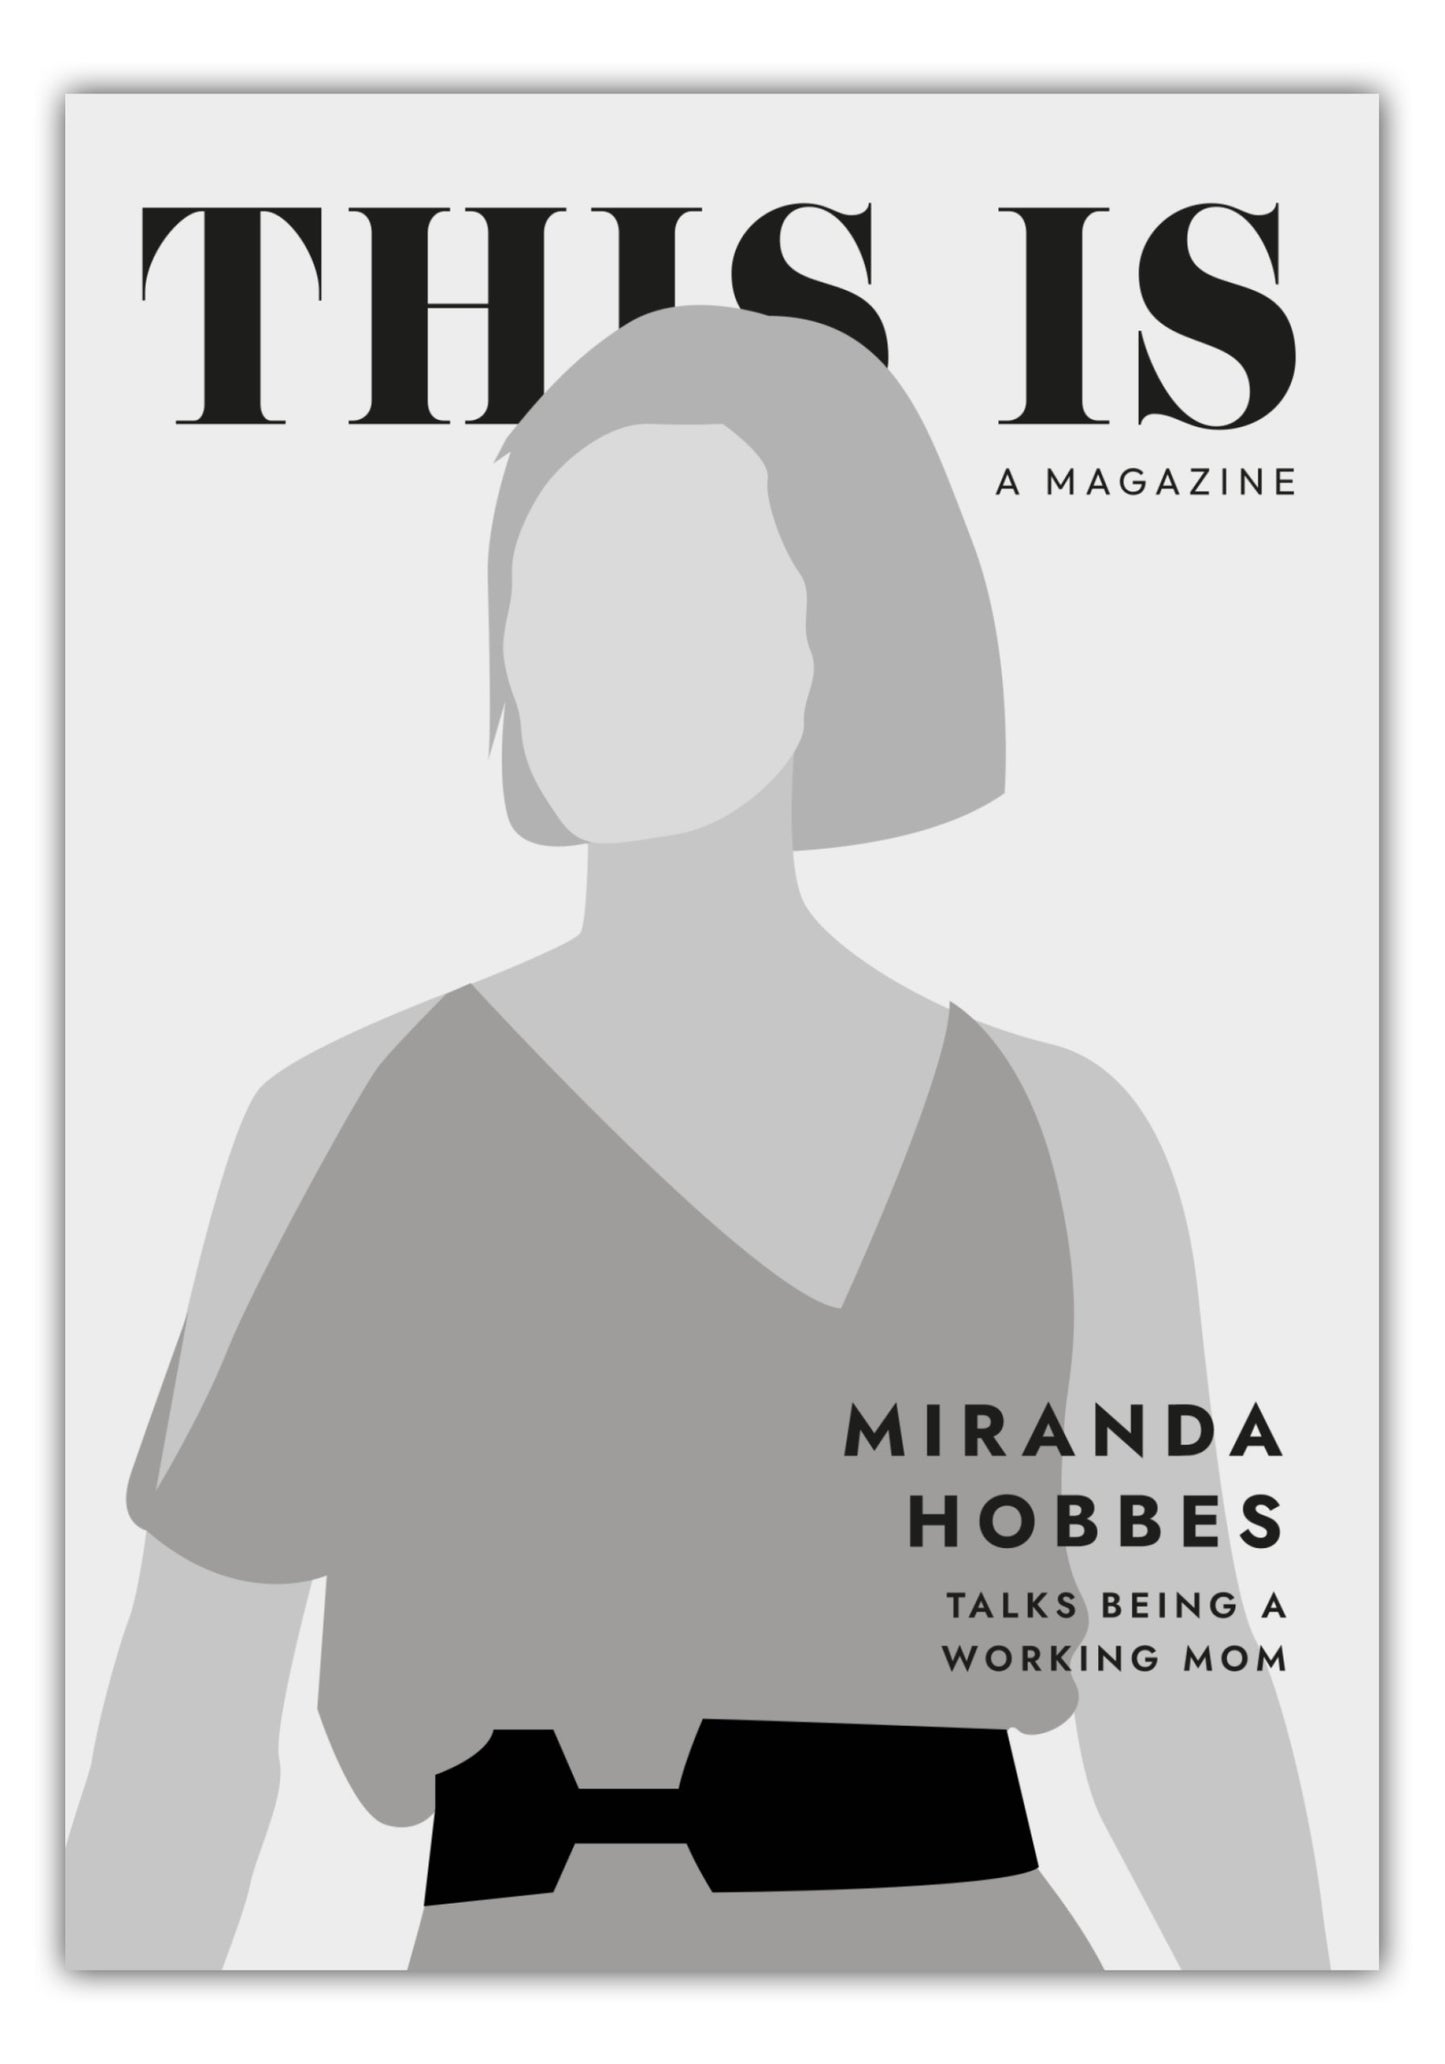 Poster Sex And The City - This Is A Magazine - Miranda Hobbes